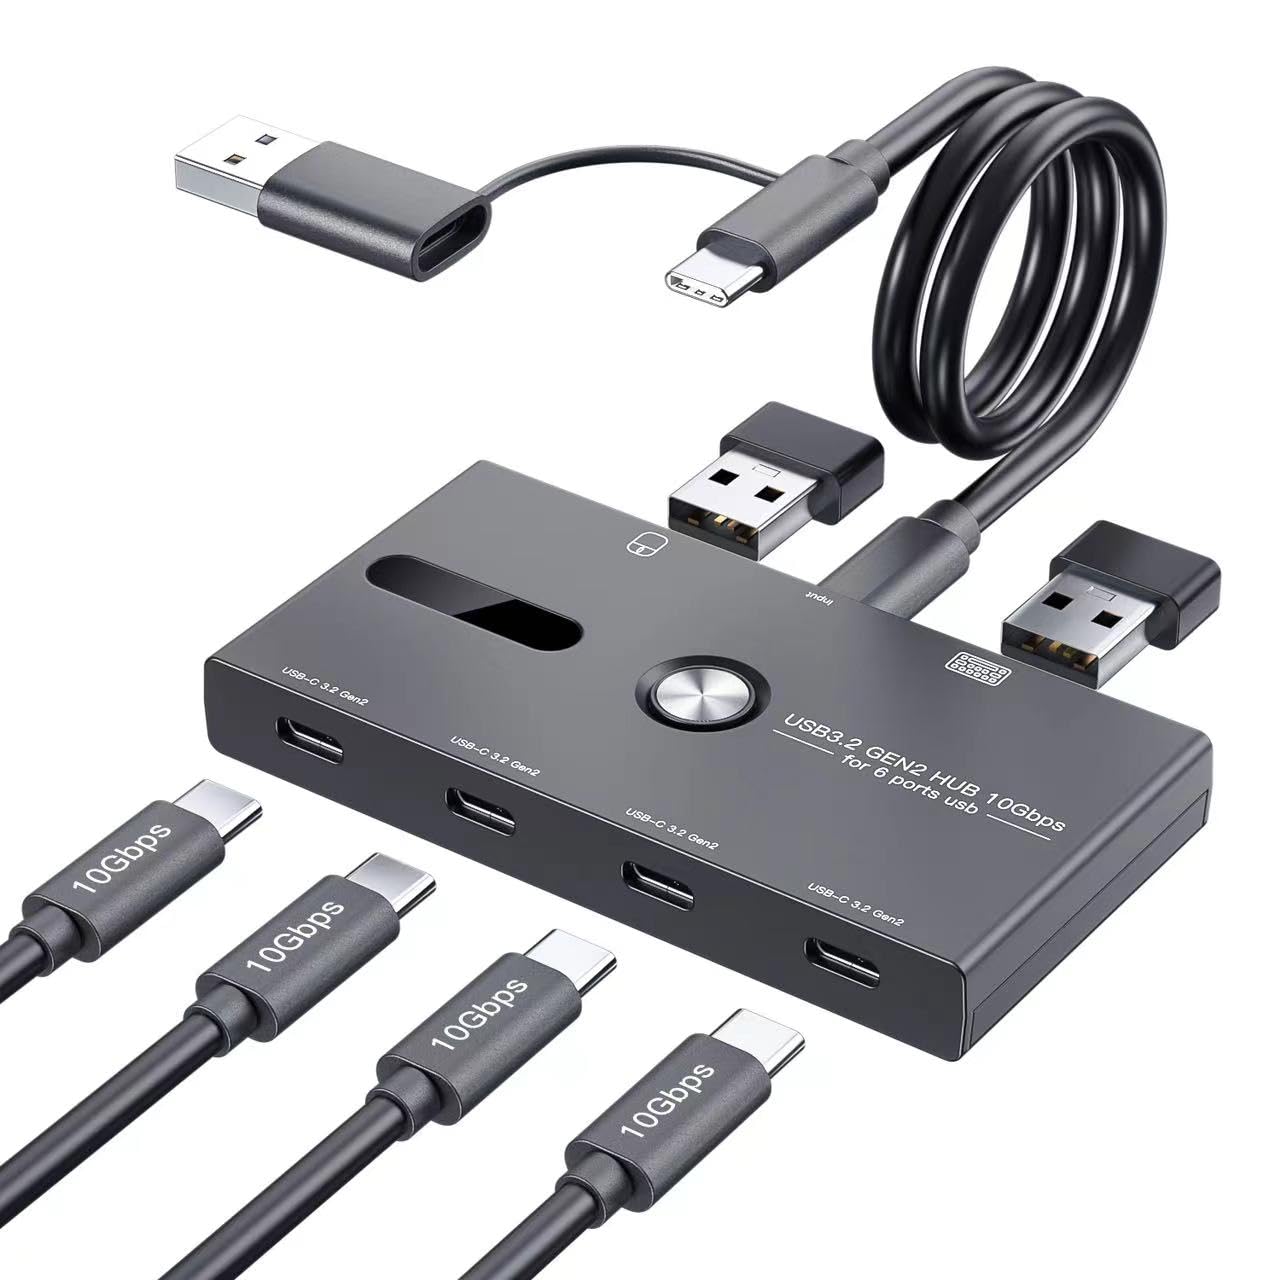 10Gbps USB C Hub, 6 Ports USB C Splitter, Type-C and USB3.0 to USB C Hub for PC, Laptop, MacBook Pro/Air, iMac, Surface Pro, Chromebook, Etc(HUB ONLY, Not Support Charging/Monitor)